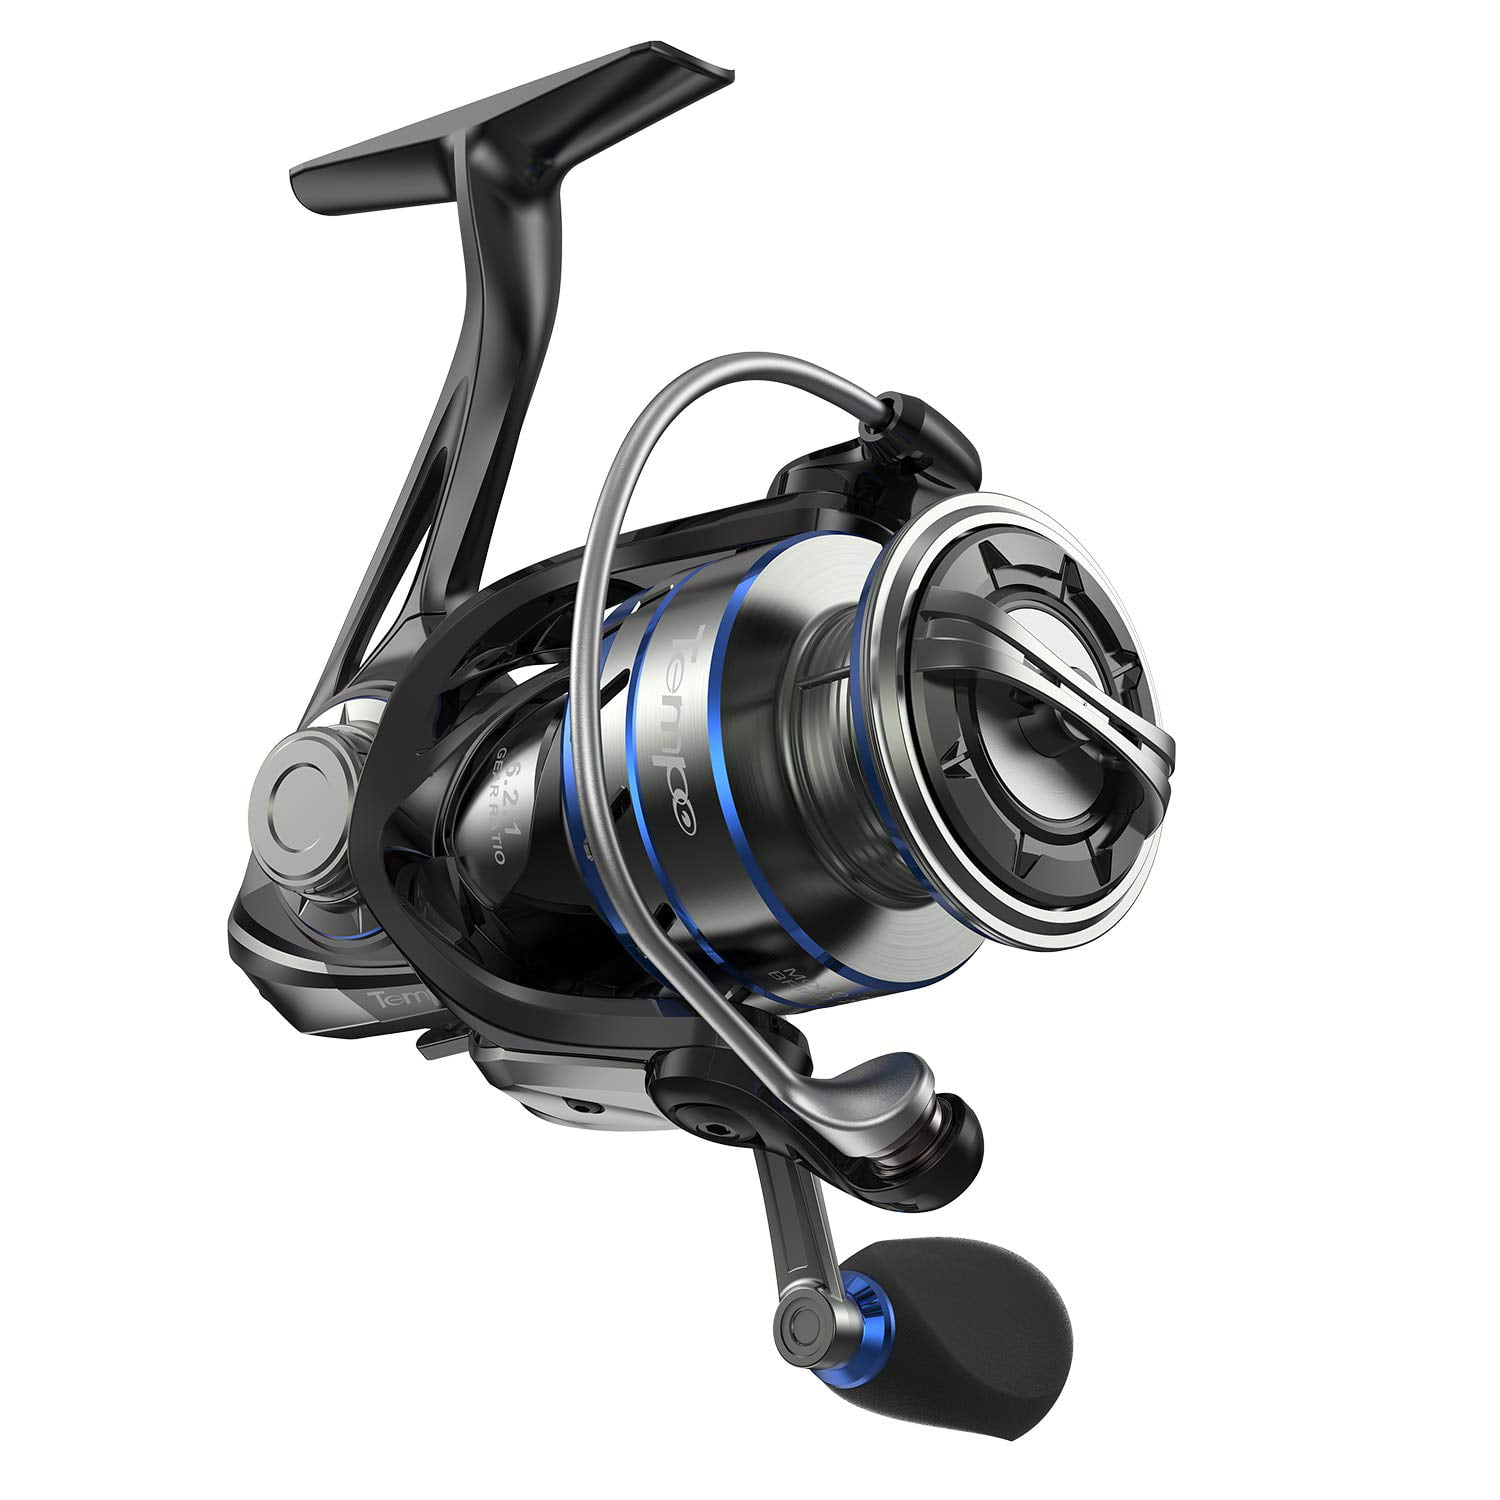 Tempo Apex Spinning Reel - Ultralight Magnesium Body Fishing Reels Spinning  with 10+1 BB, Carbon Fiber Max Drag 39 LBs, Smooth Fishing Reel with  Aluminum Shaft and Handle for Bass Trout Catfish - Yahoo Shopping